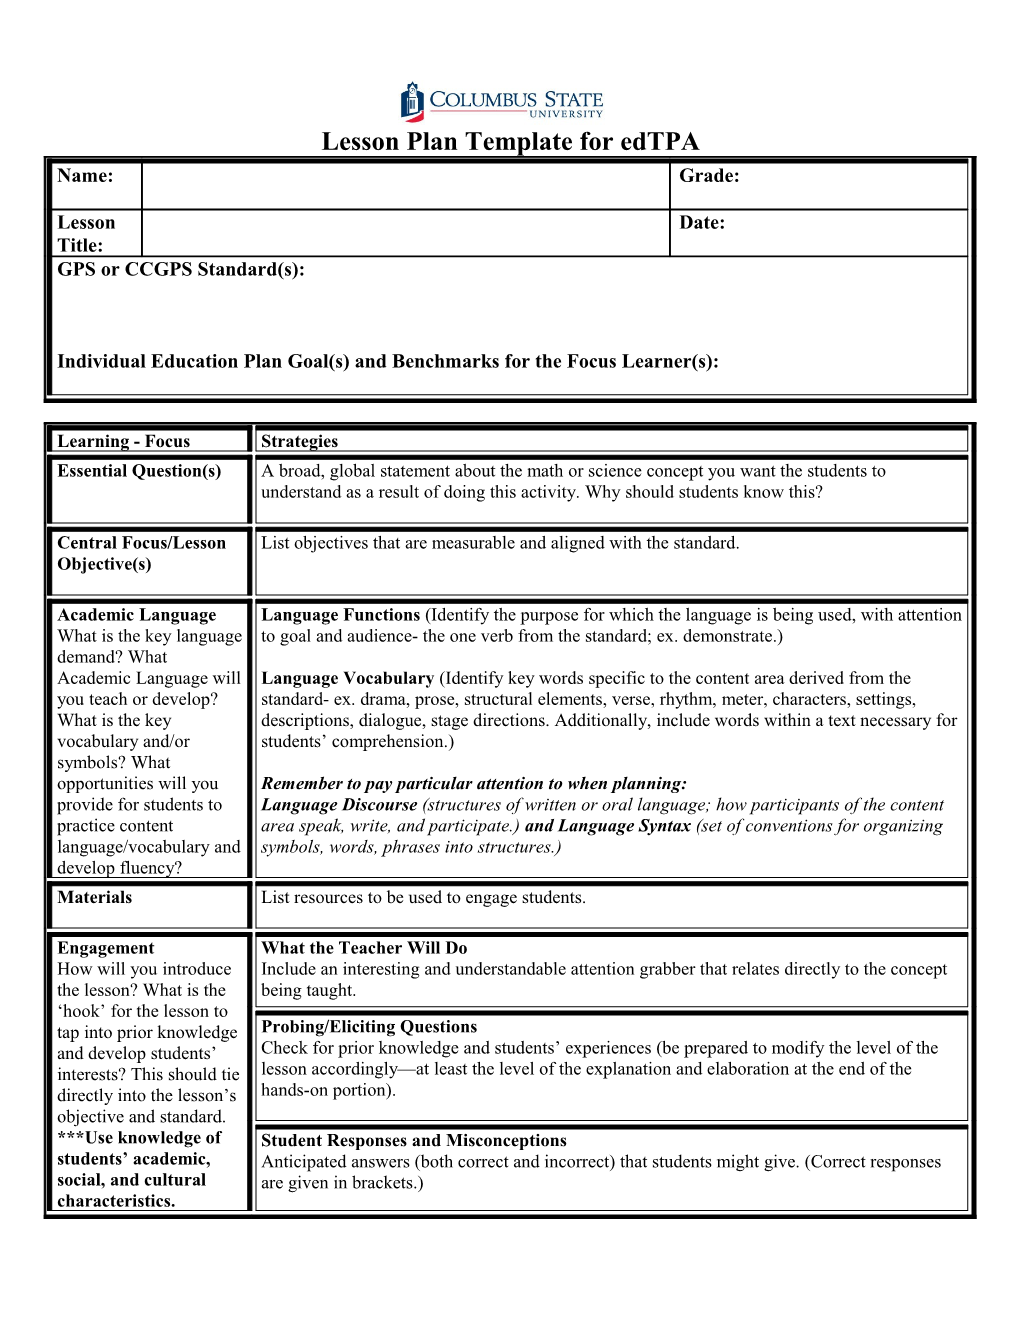 Lesson Plan Template for Edtpa